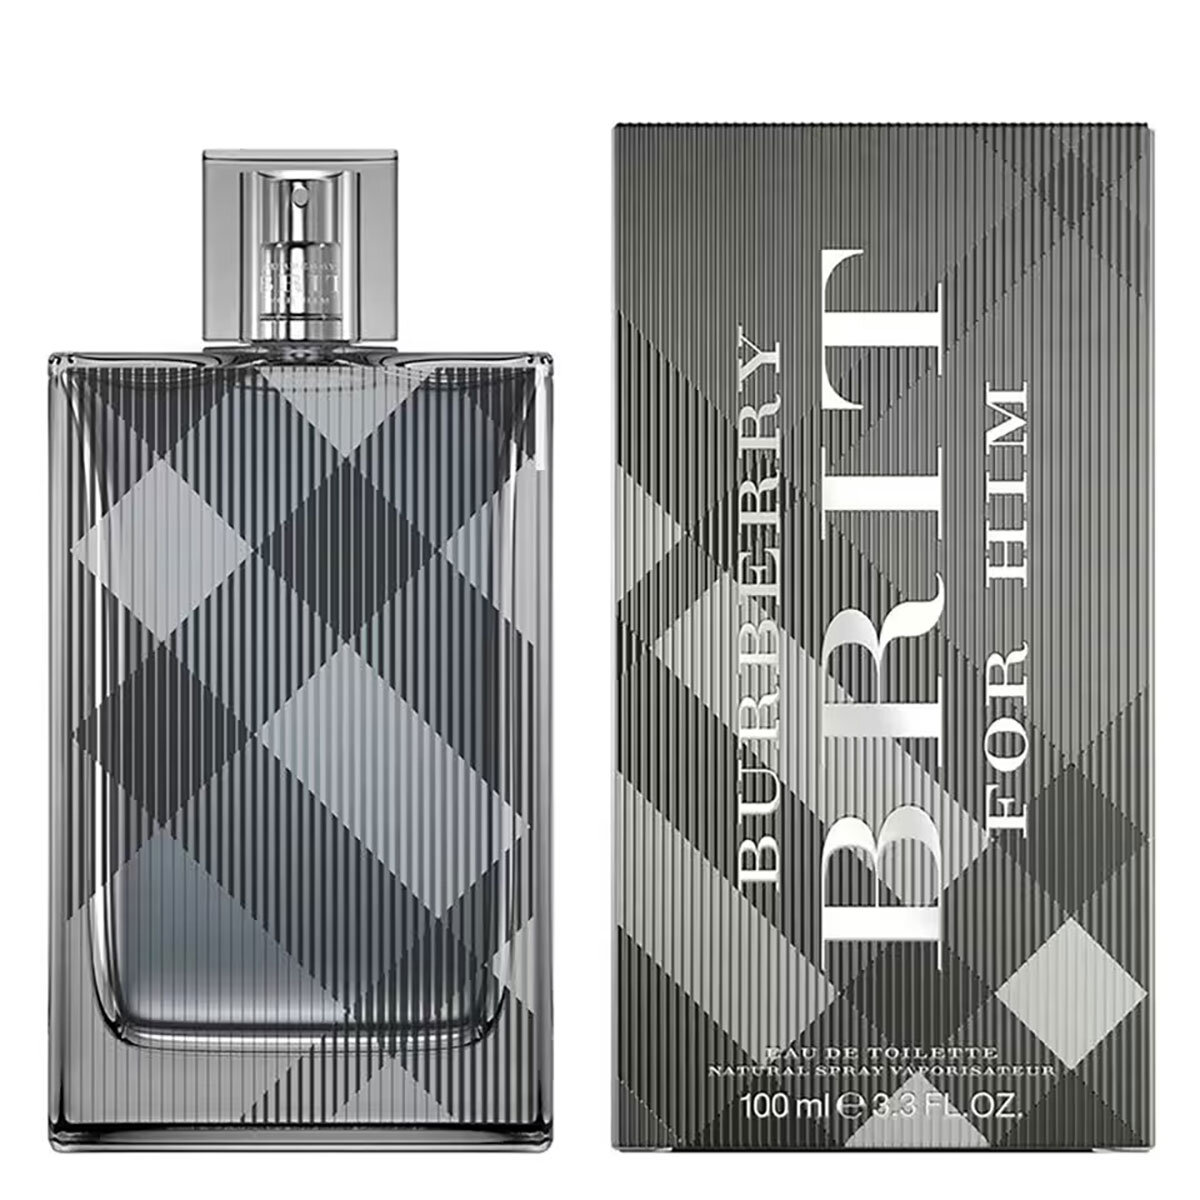 Burberry Brit Mens EDT Spray 100ml image of bottle and box